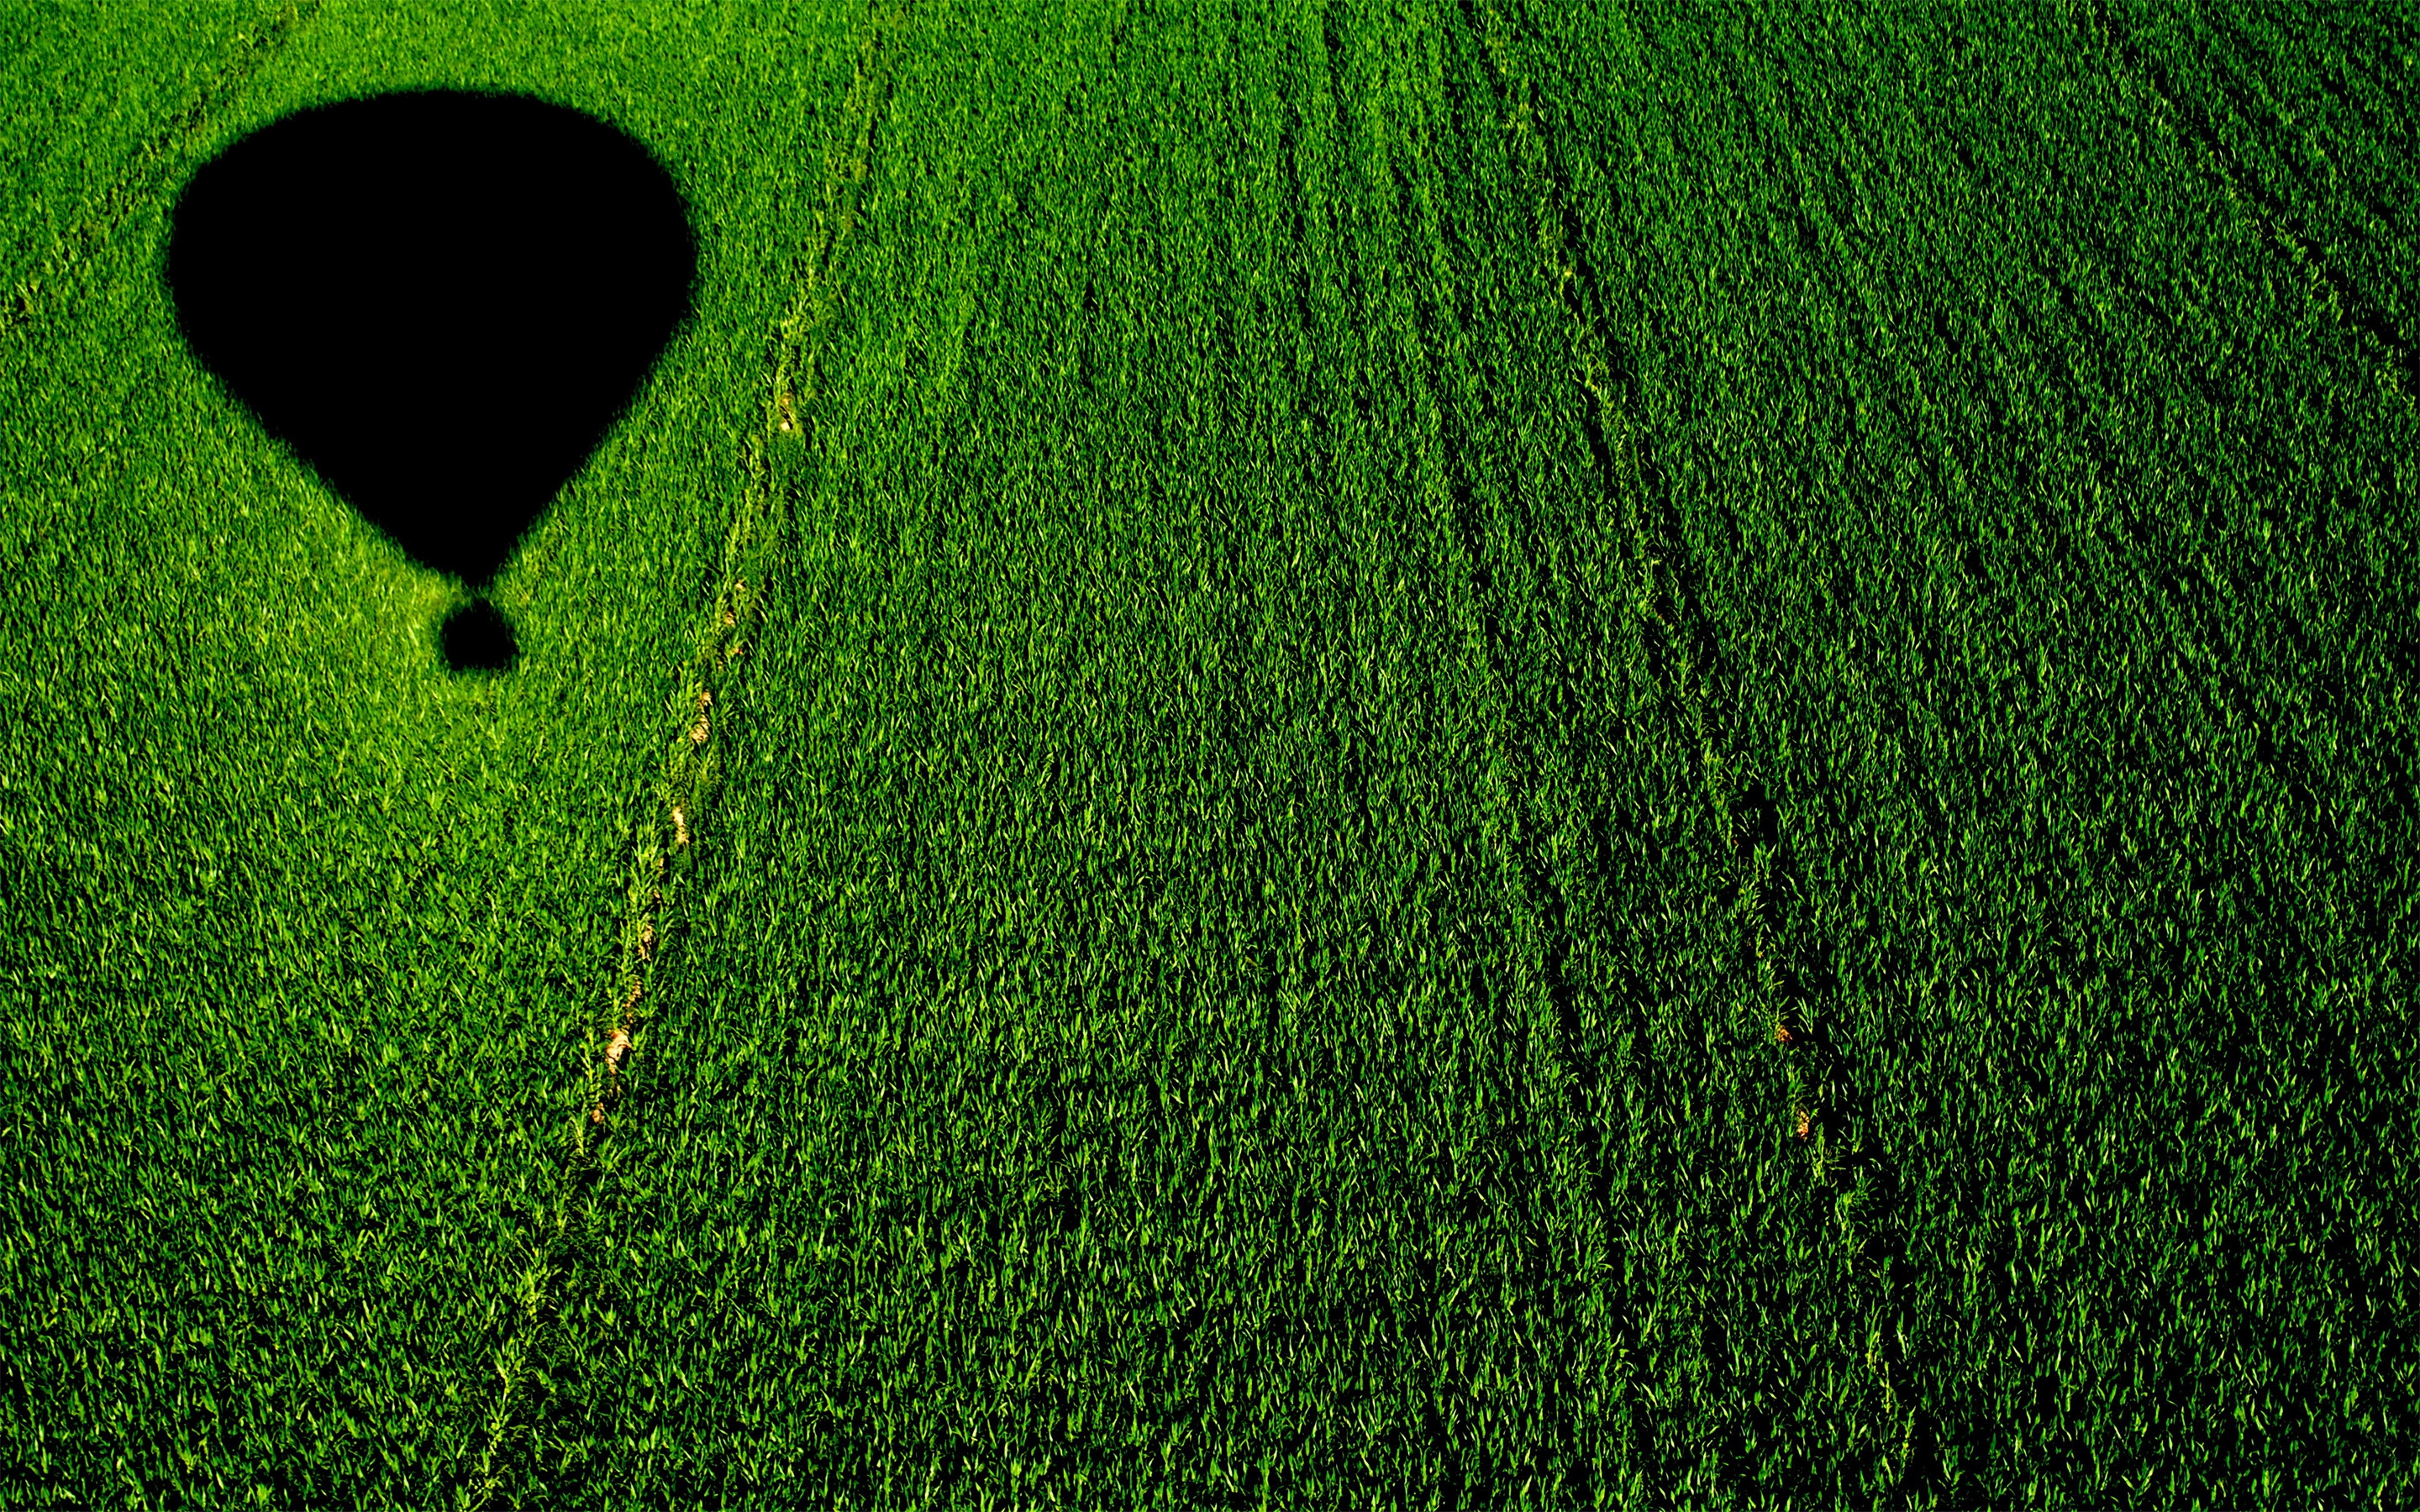 Balloon over a Cornfield for 2880 x 1800 Retina Display resolution